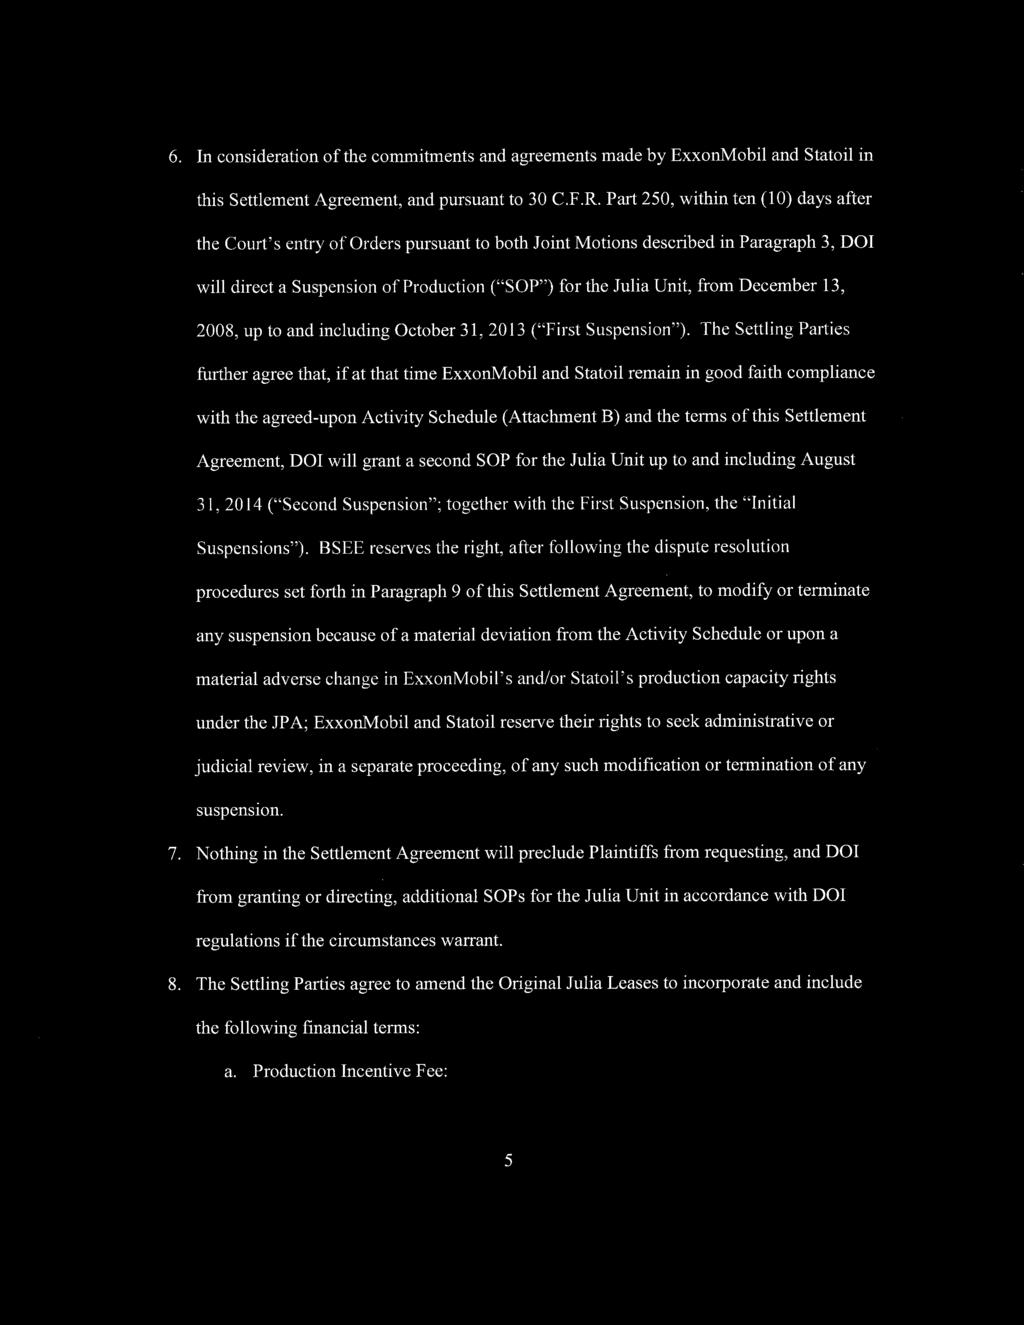 Part 250, within ten (10) days after the Court's entry of Orders pursuant to both Joint Motions described in Paragraph 3, DOI will direct a Suspension of Production ("SOP") for the Julia Unit, from